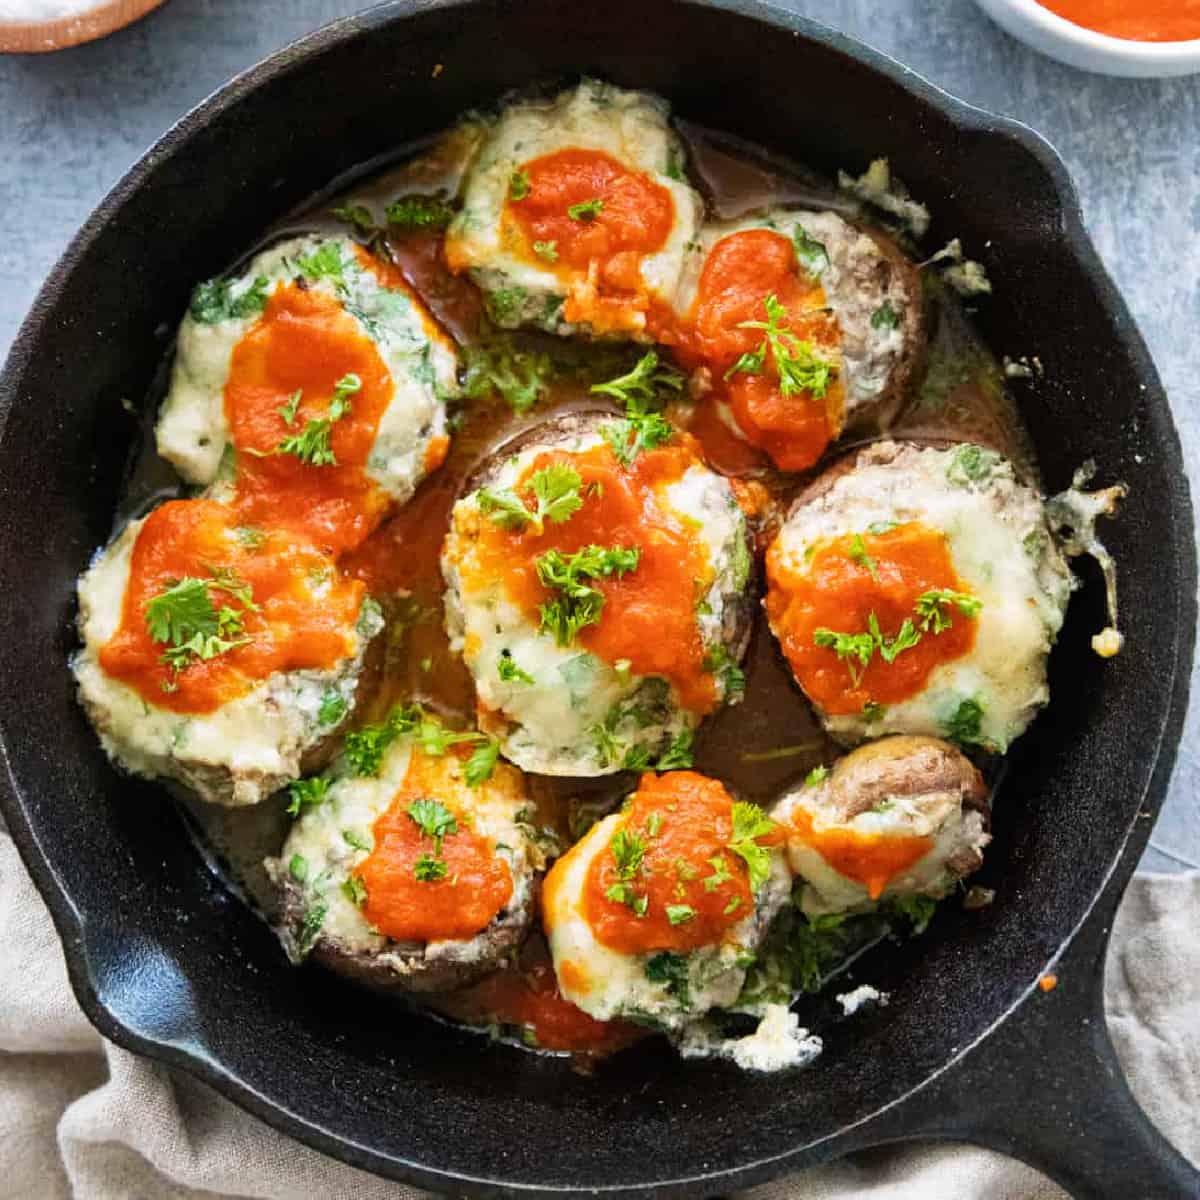 These delicious grilled stuffed mushrooms are ready in 30 minutes. Stuffed with 3 types of cheese and spinach, this is a crowd pleasing appetizer!
